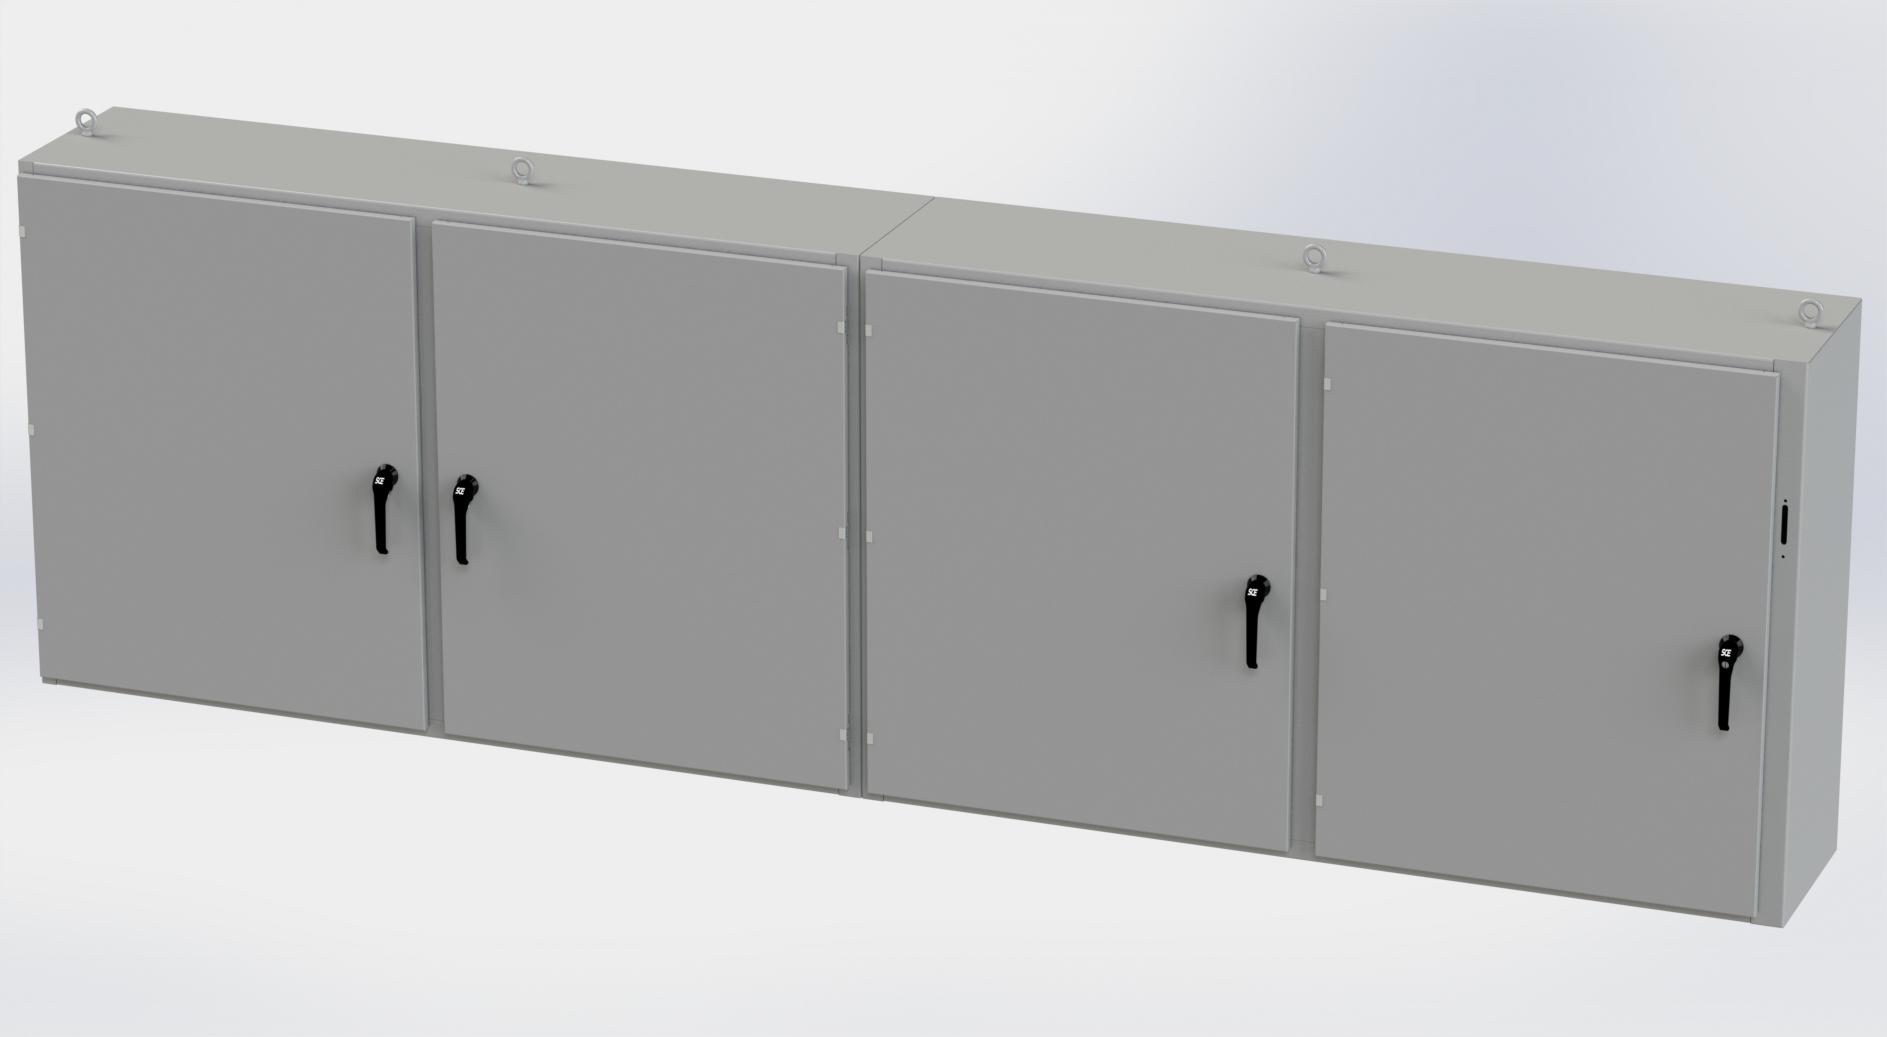 Saginaw Control SCE-48X4D15818 4DR Disc. Enclosure, Height:48.00", Width:157.50", Depth:18.00", ANSI-61 gray powder coated inside and out. Optional sub-panels are powder coated white.